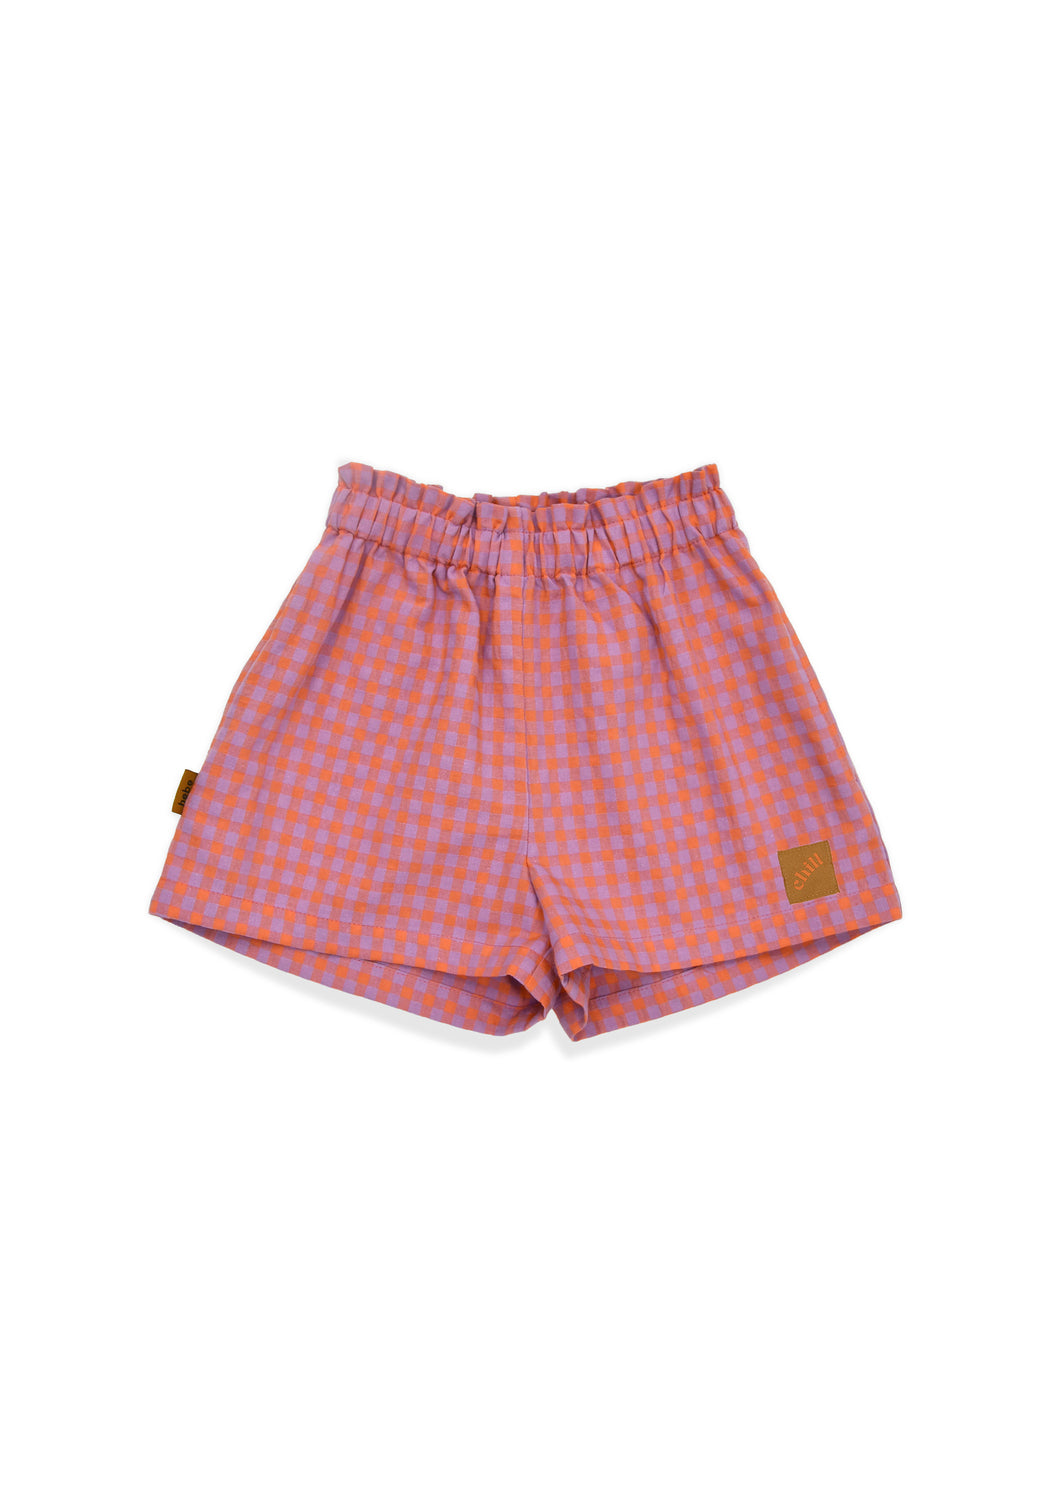 Shop these cotton girls shorts in checked bright pink and orange colour! These girls shorts with pockets are the most comfortable girls' summer shorts. Shop the widest selection for girls summer clothing online, form shorts to dresses and swimsuits. Mommy and Me fashion available for twinning fashion.